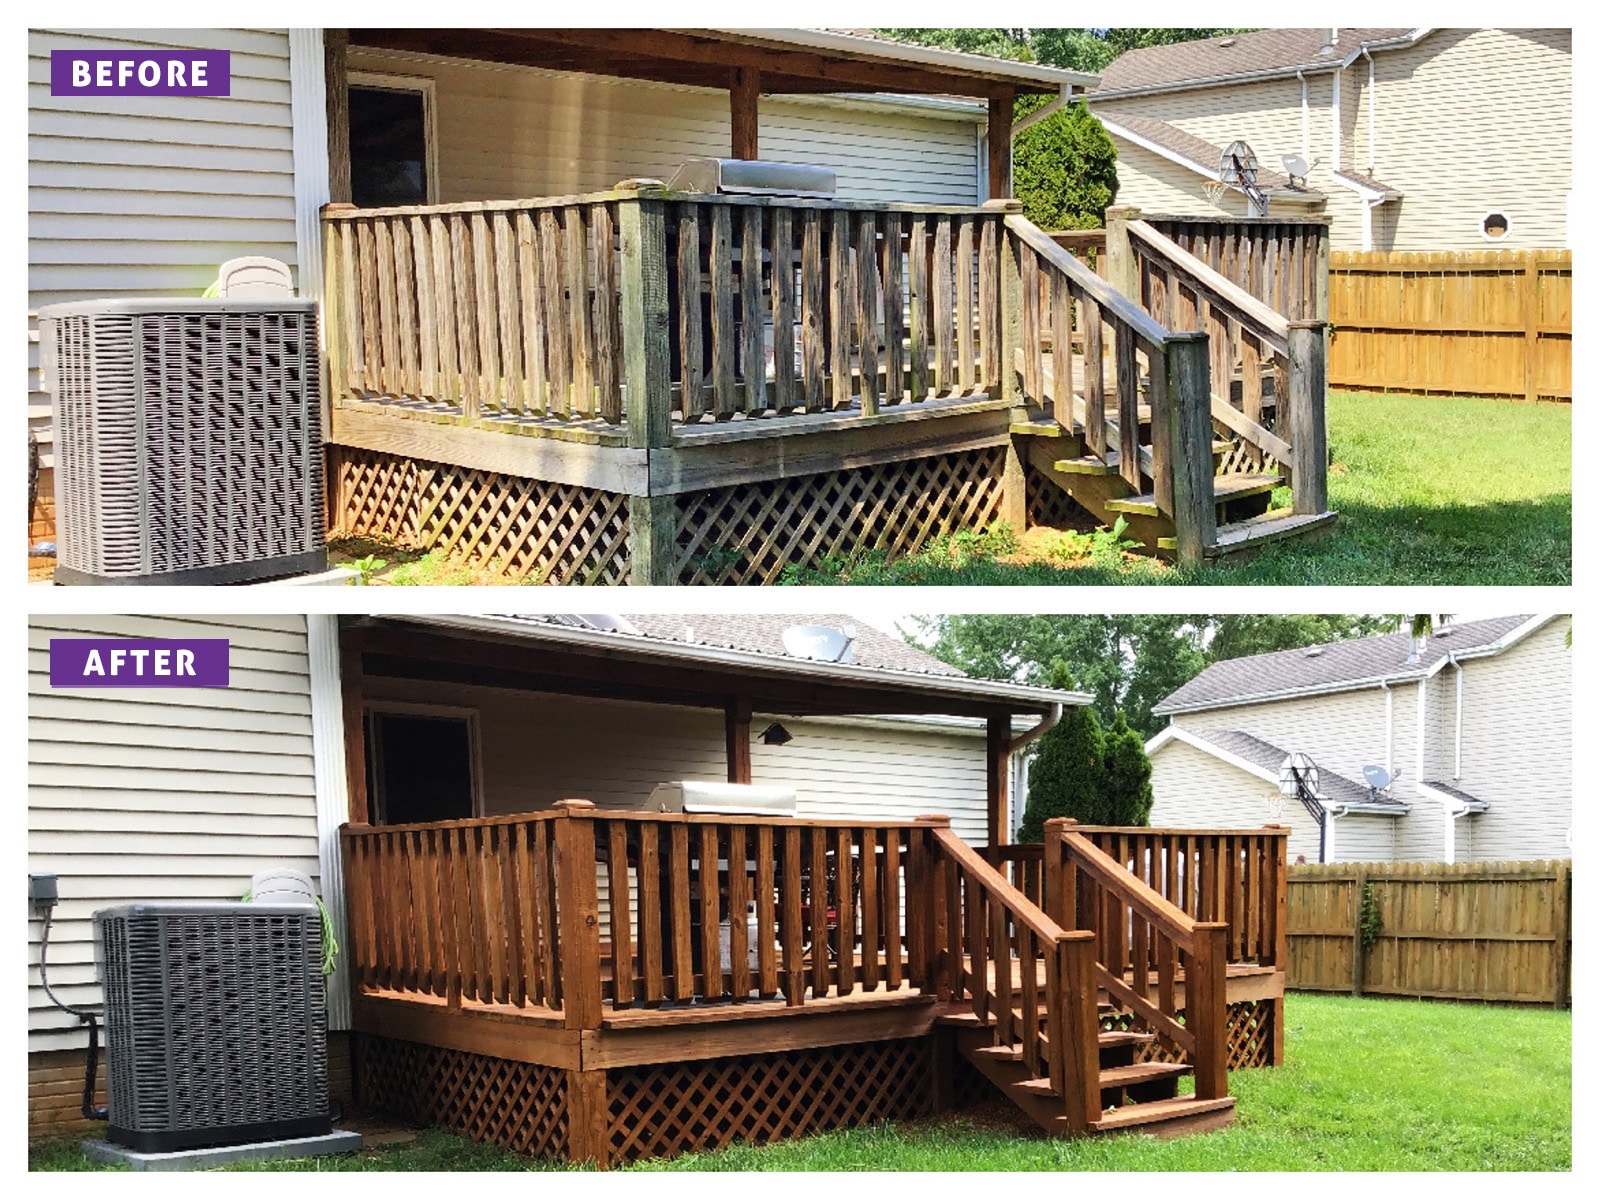 Renewed Wood Patio Before and After